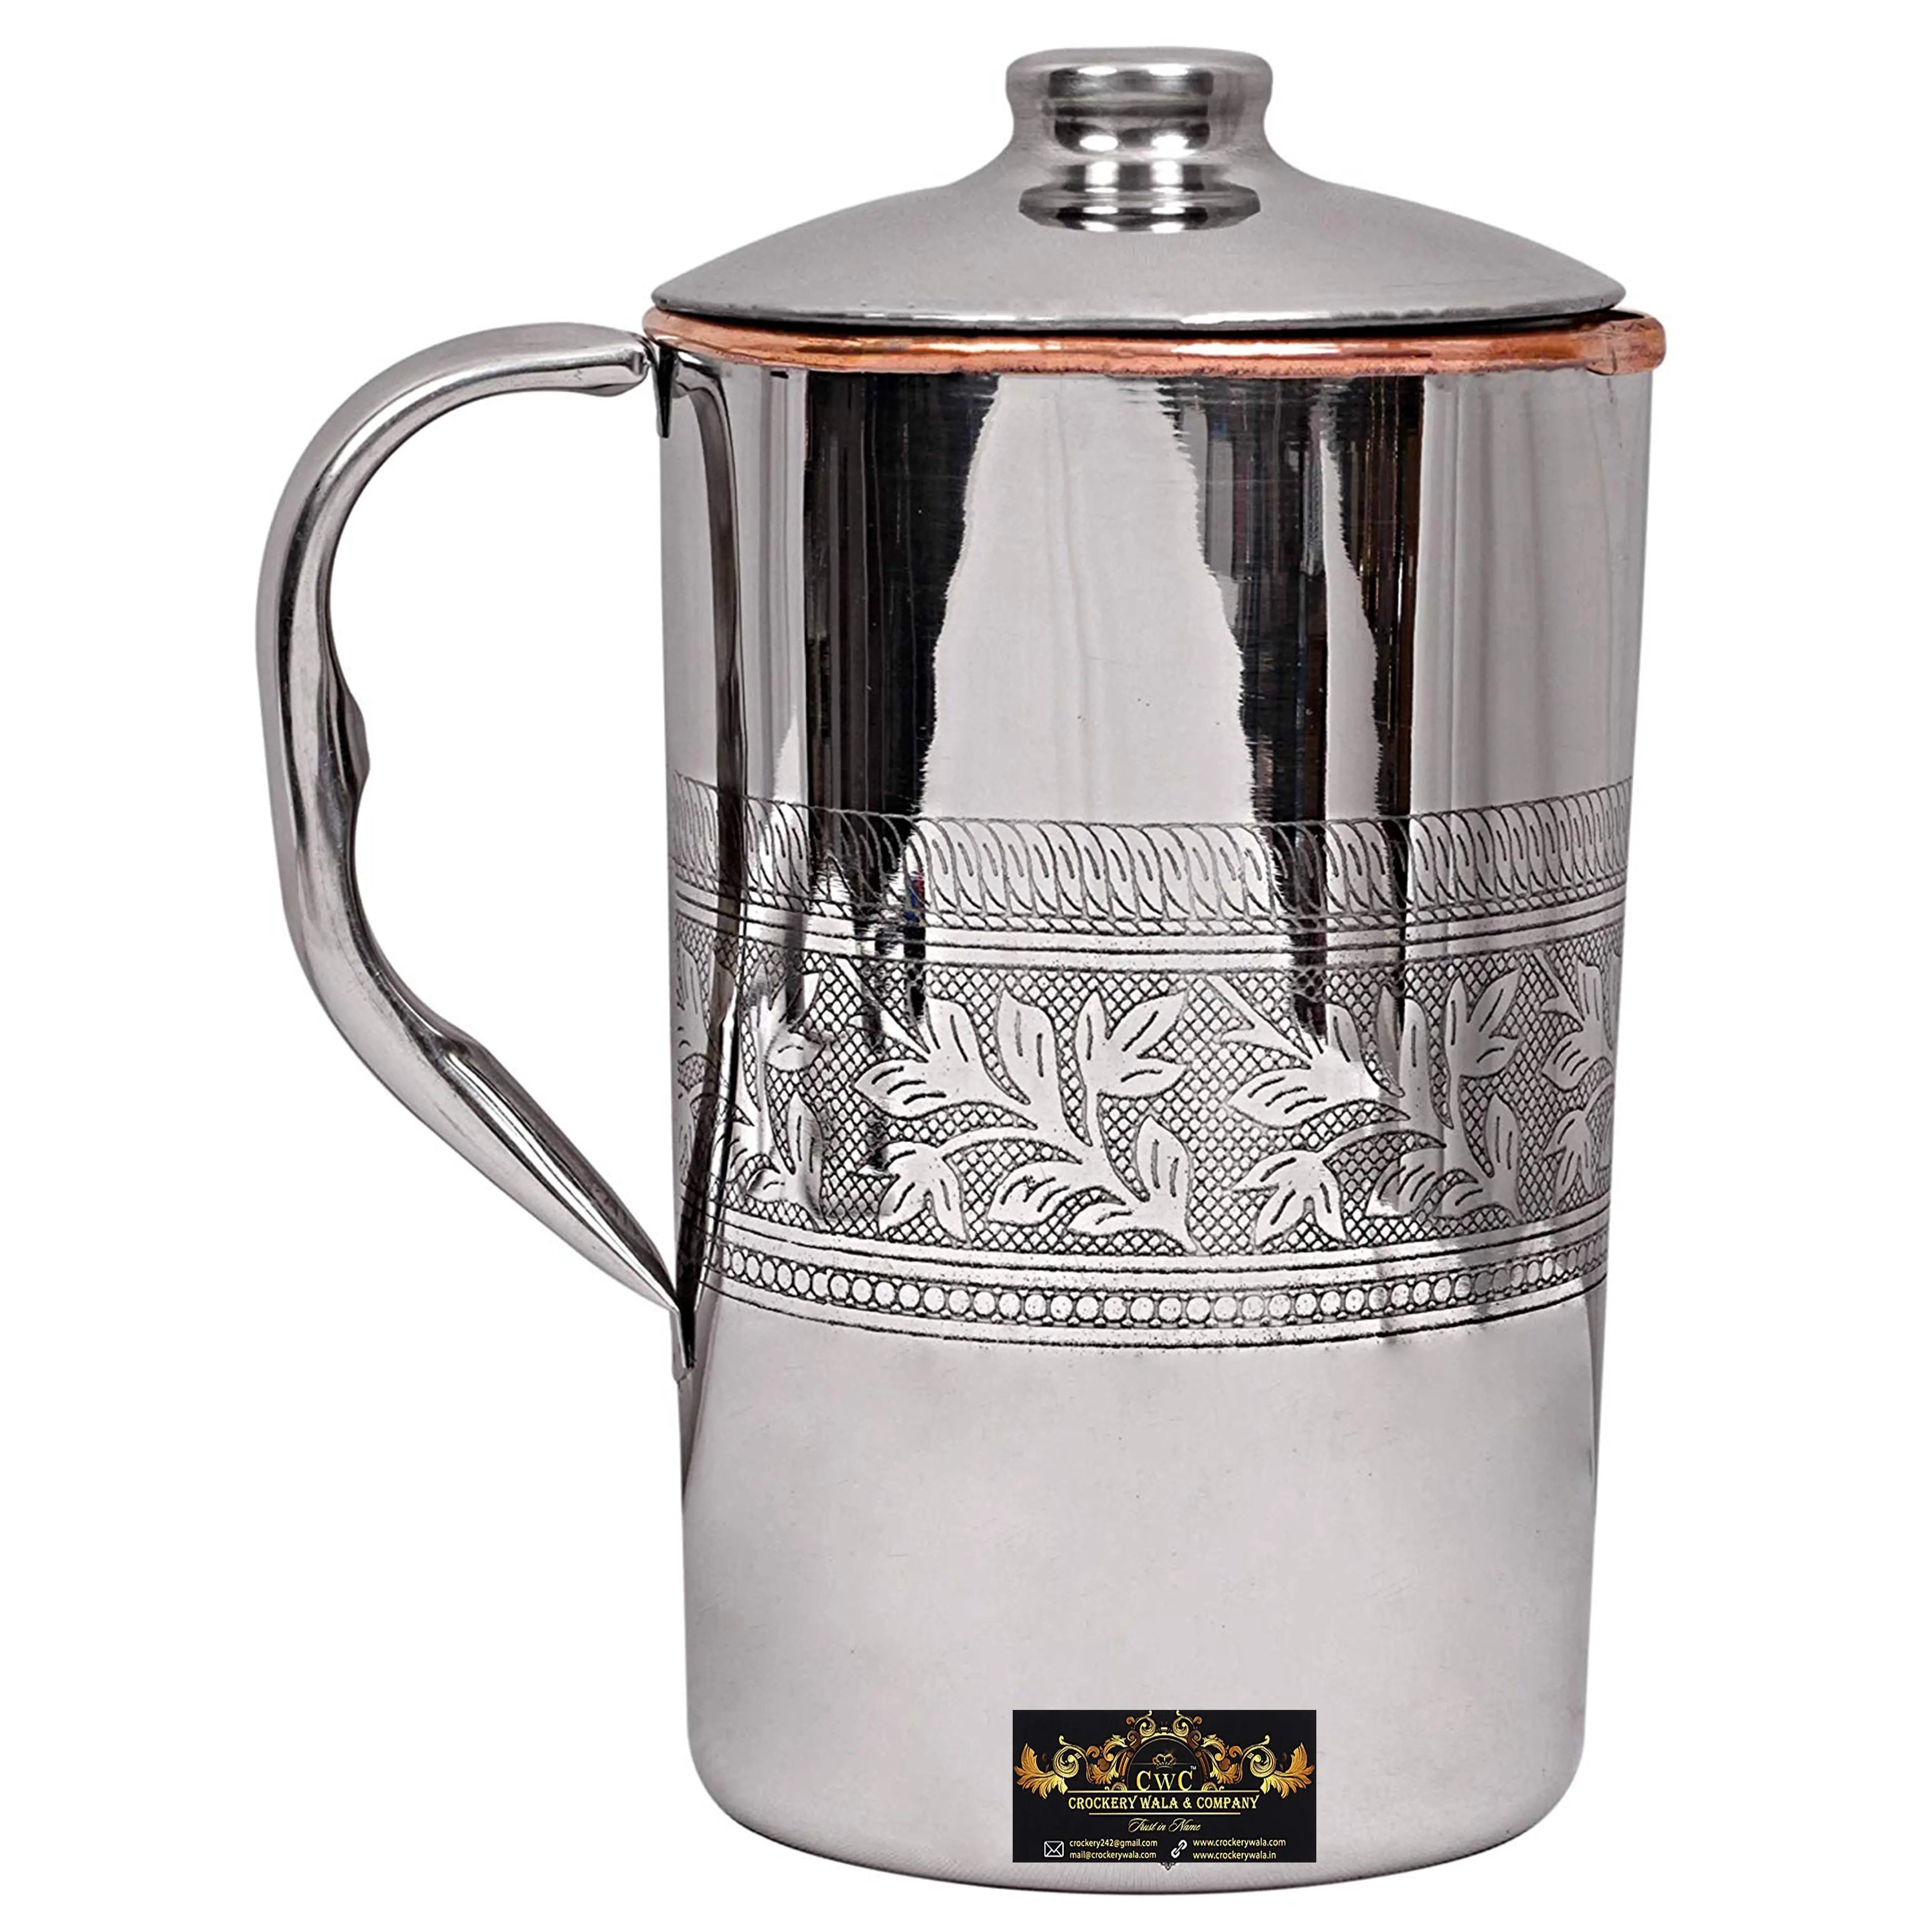 Copper Jug With Steel Outside Etching Design - CROCKERY WALA AND COMPANY 